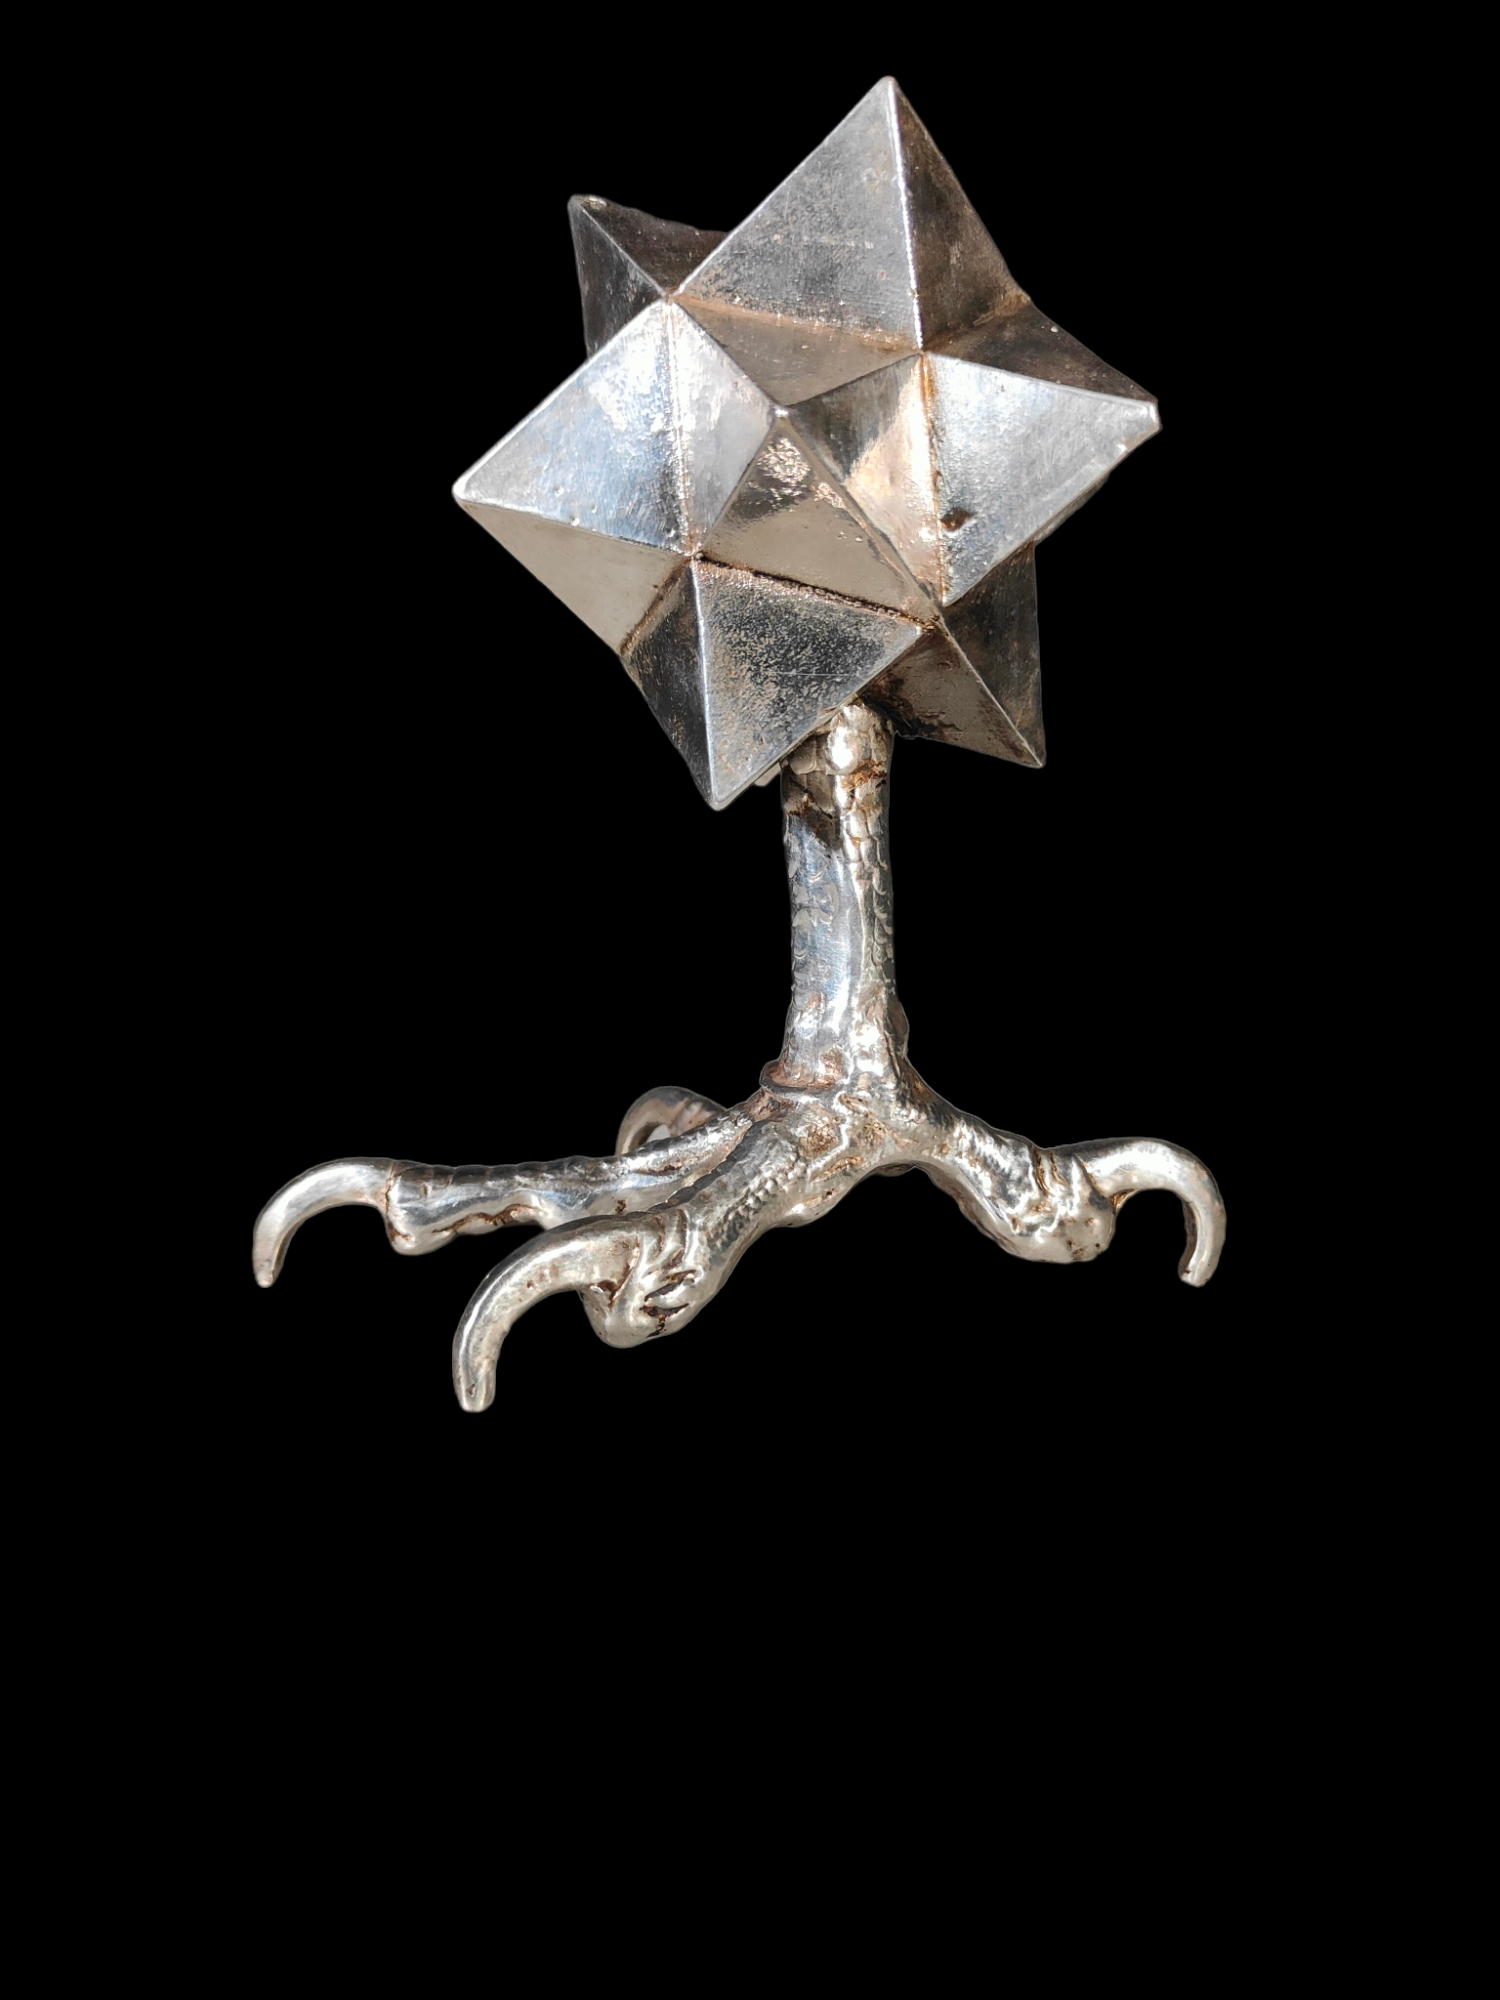 Metallic Polyhedron from the 19th Century – Hexaoctahedron with 48 Faces